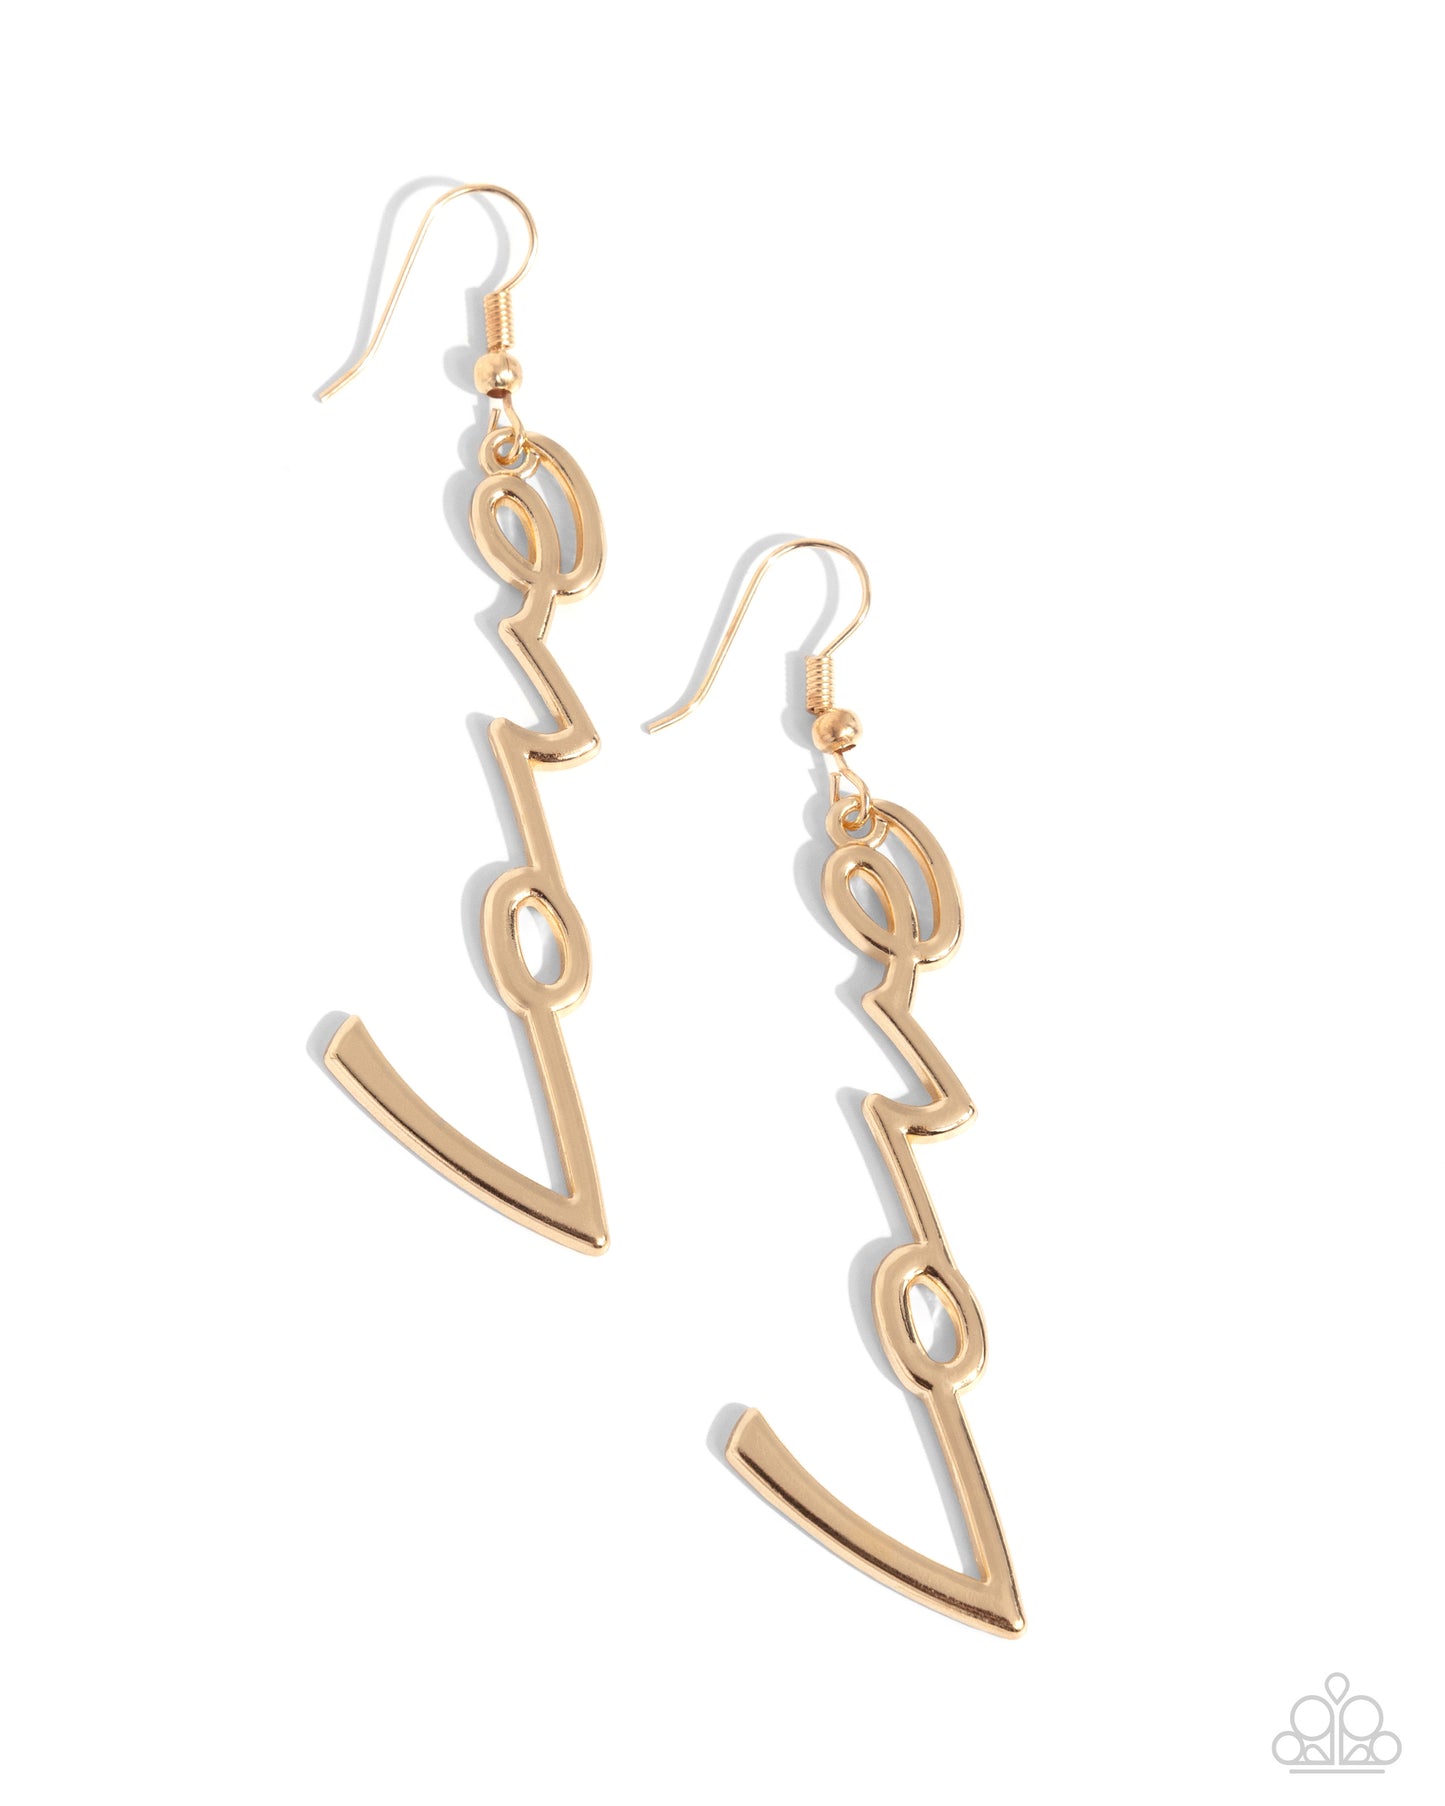 Light-Catching Letters - Gold "LOVE" Paparazzi Earrings